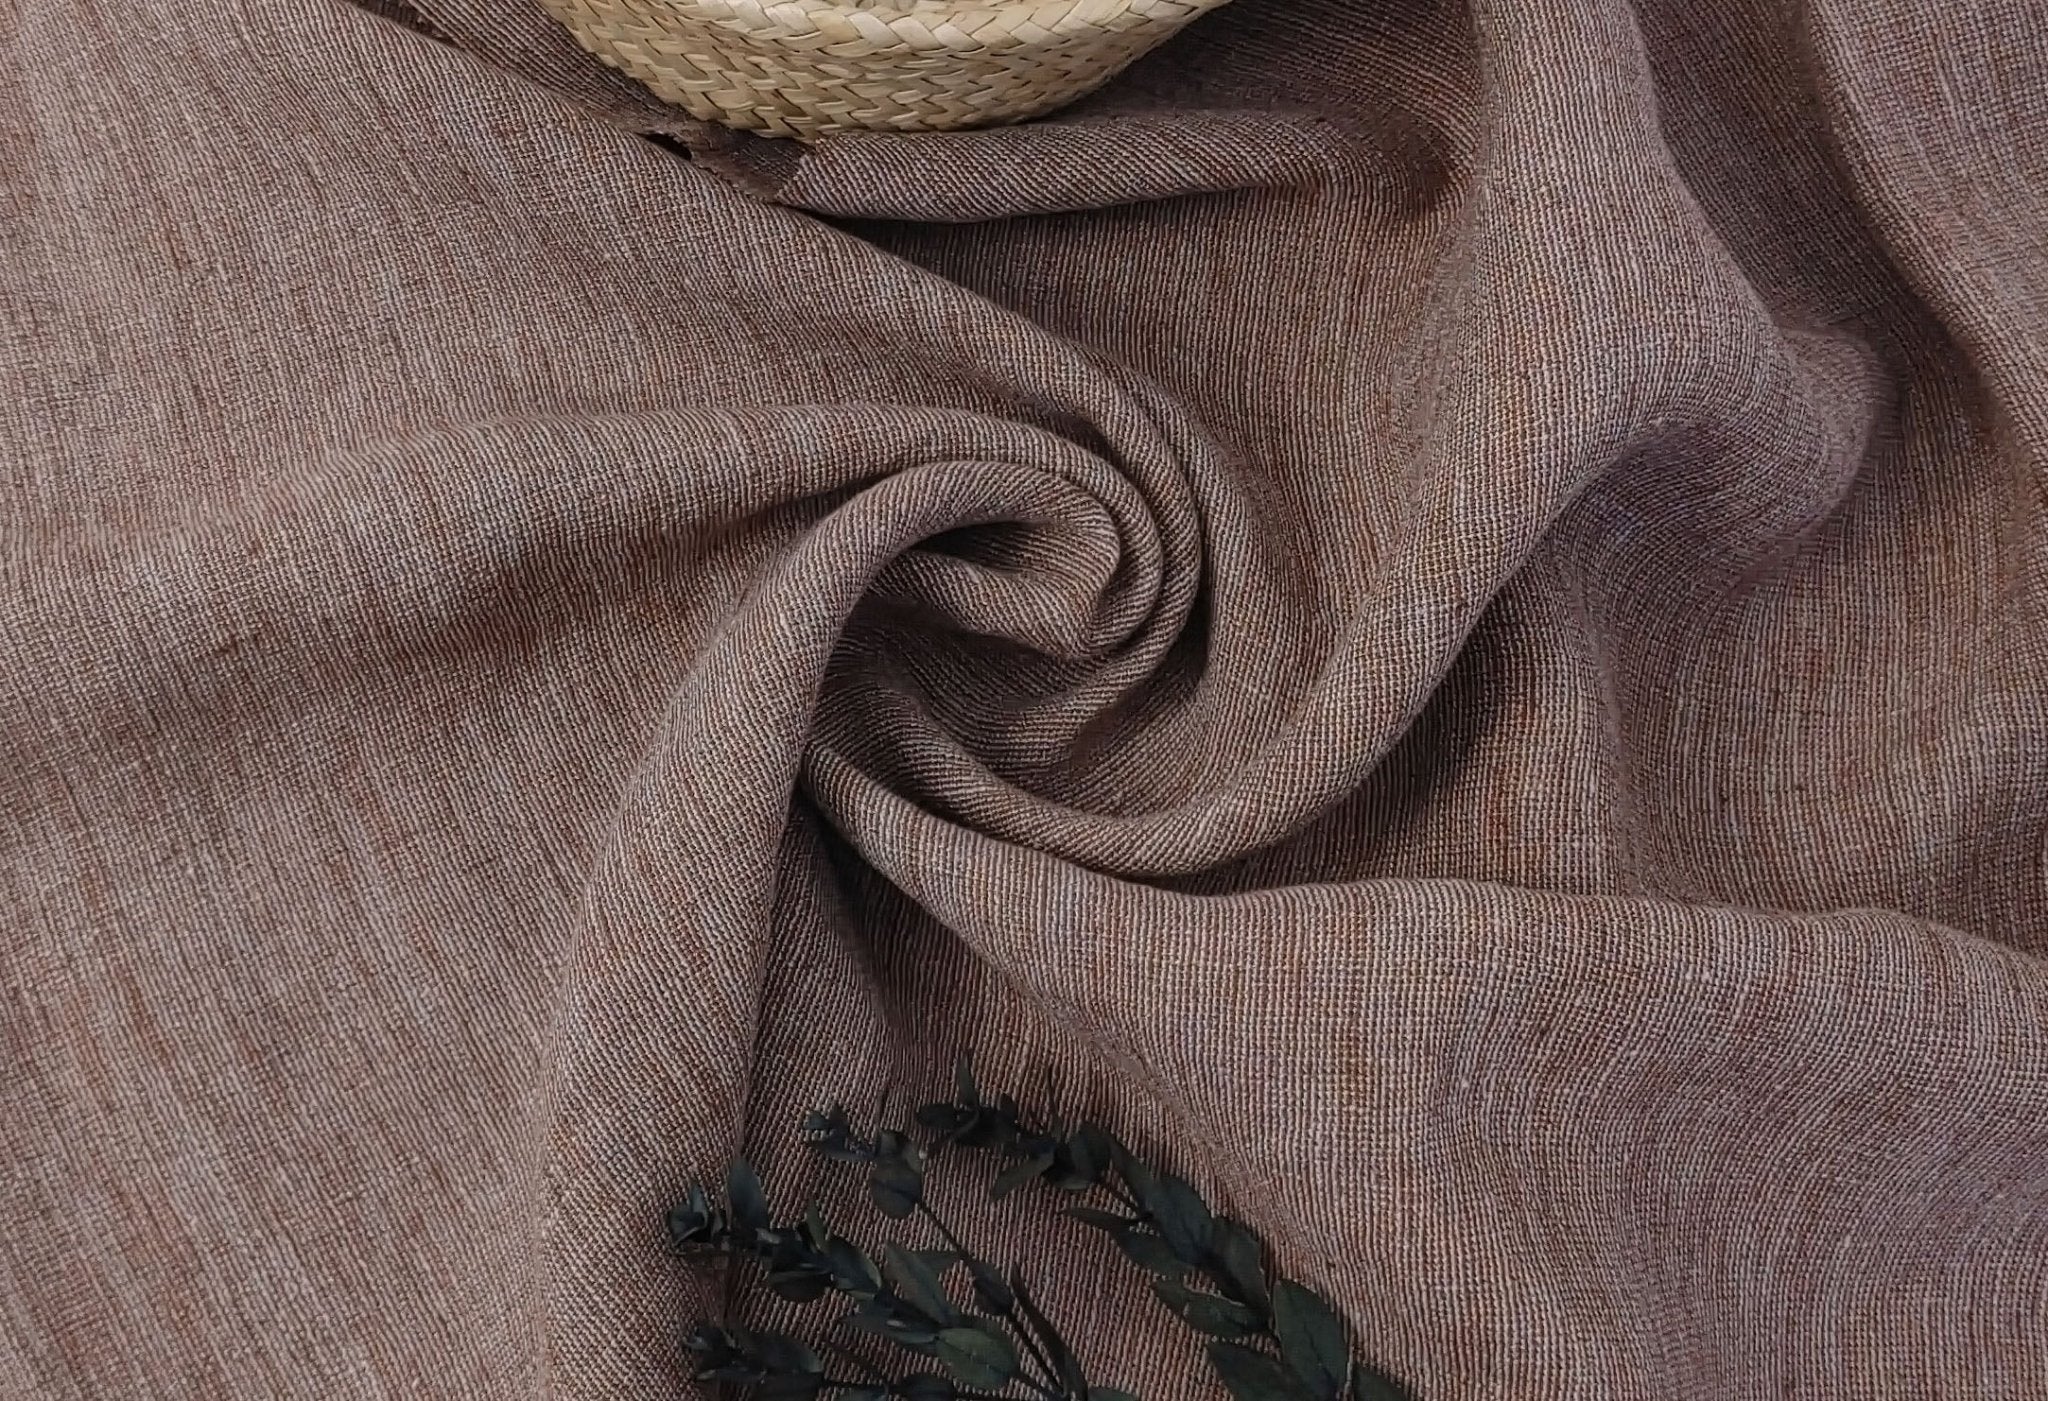 Premium Linen Polyester High Twisted Yarn, 2-Tone Effect Fabric for Elegant Creations 4811 6316 - The Linen Lab - Brown